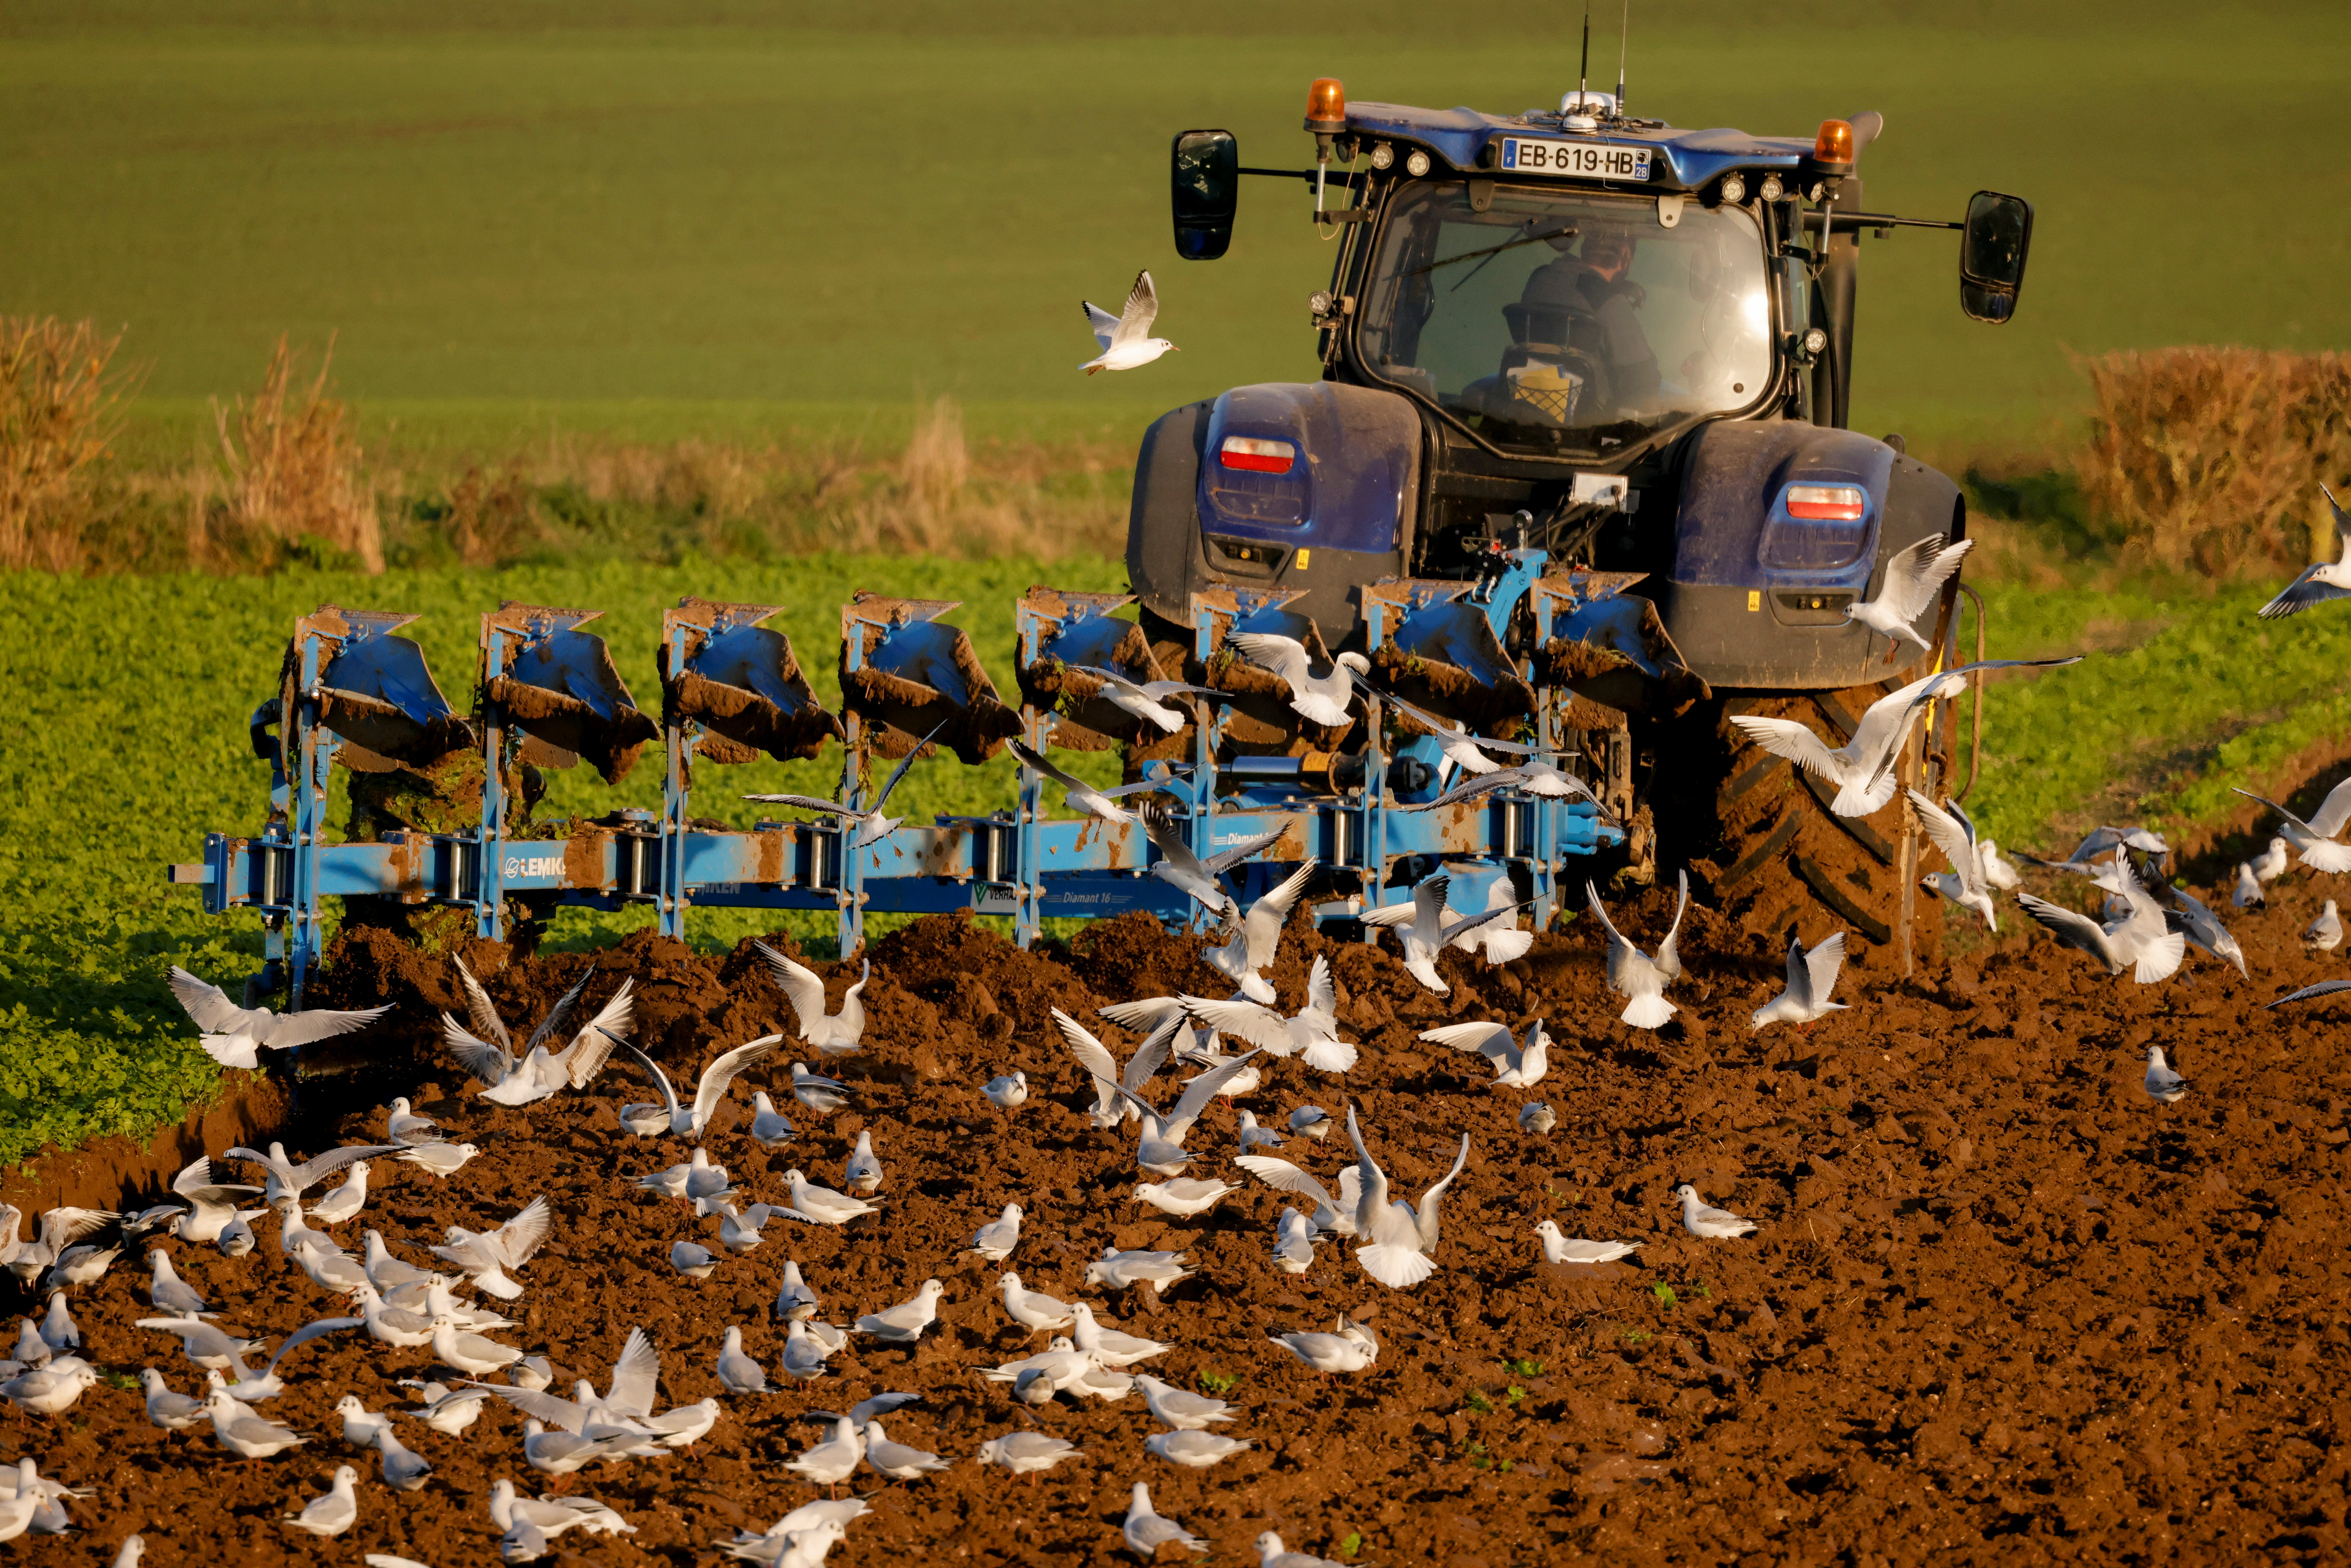 Seagulls fly over a tractor as a french farmer plows his field during sunset in Inchy-en-Artois